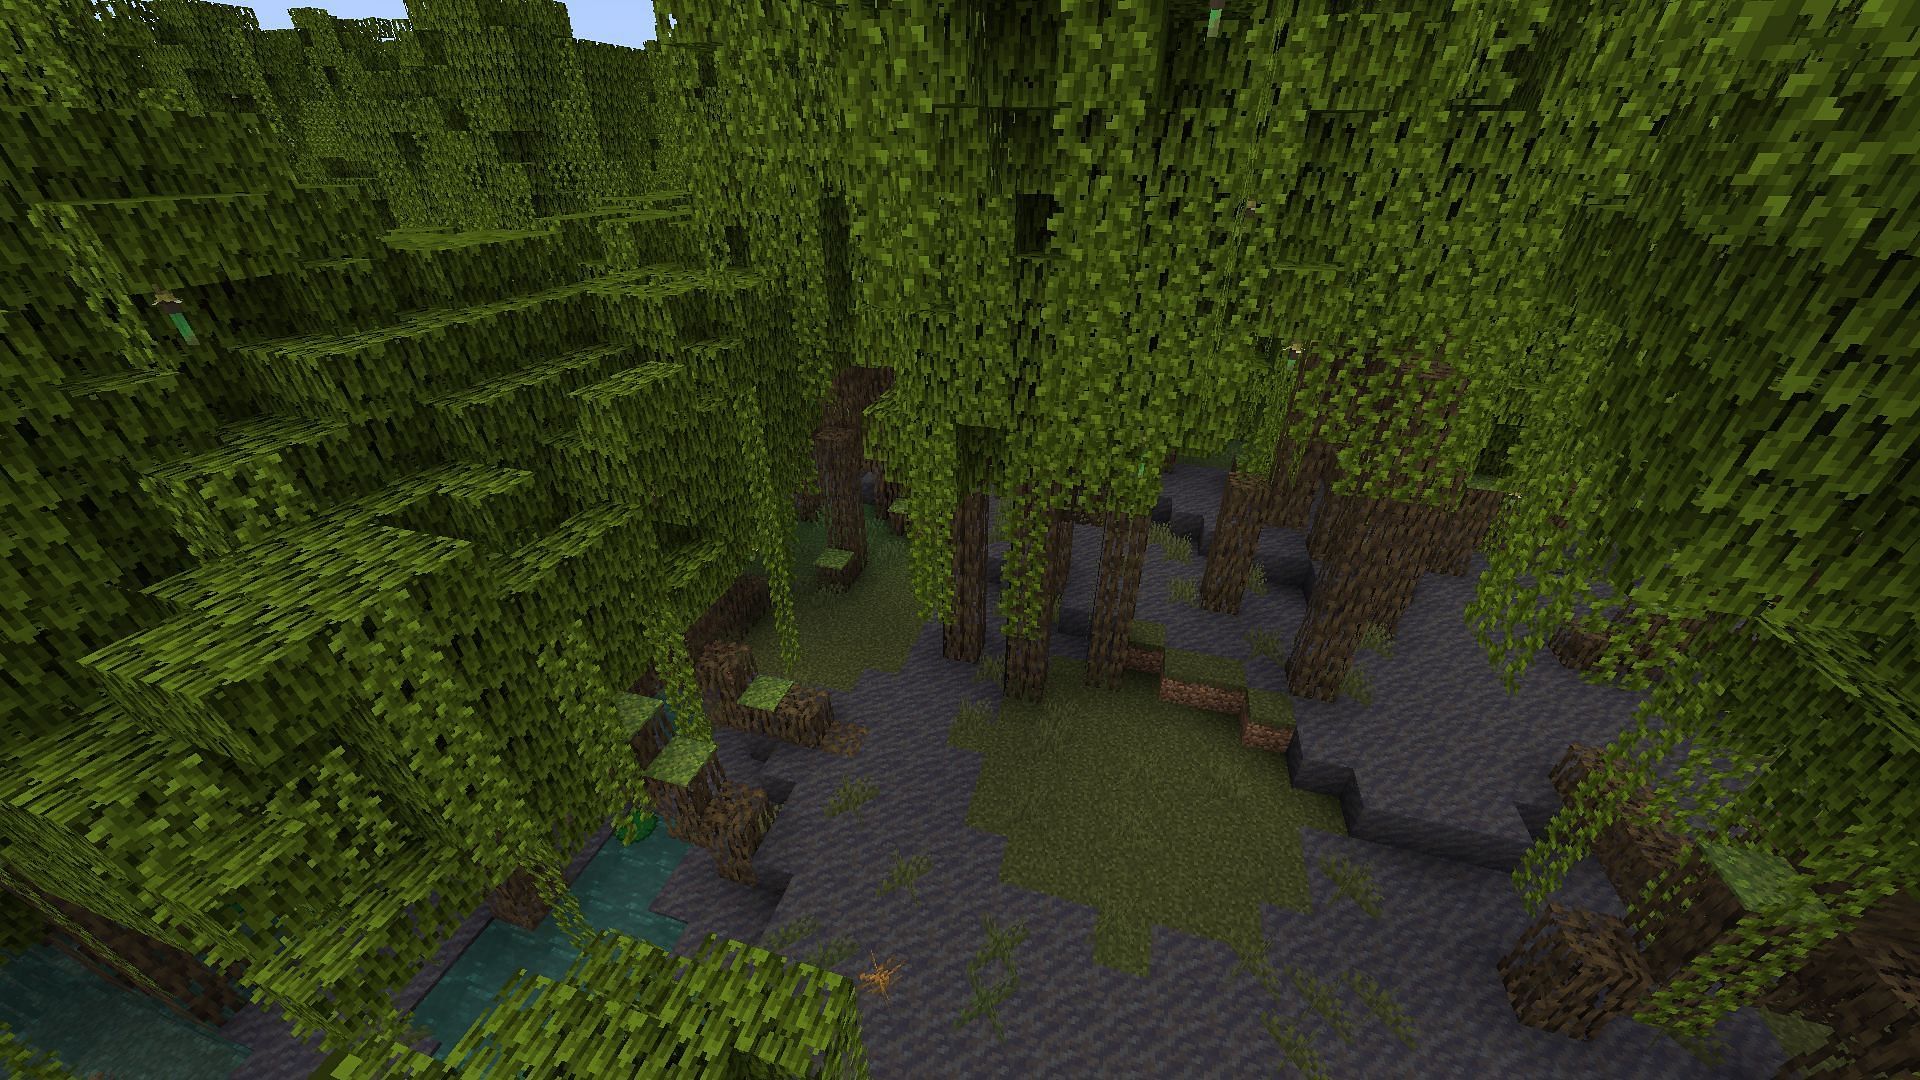 Players will spawn directly inside Mangrove Swamp in Minecraft (Image via Mojang)